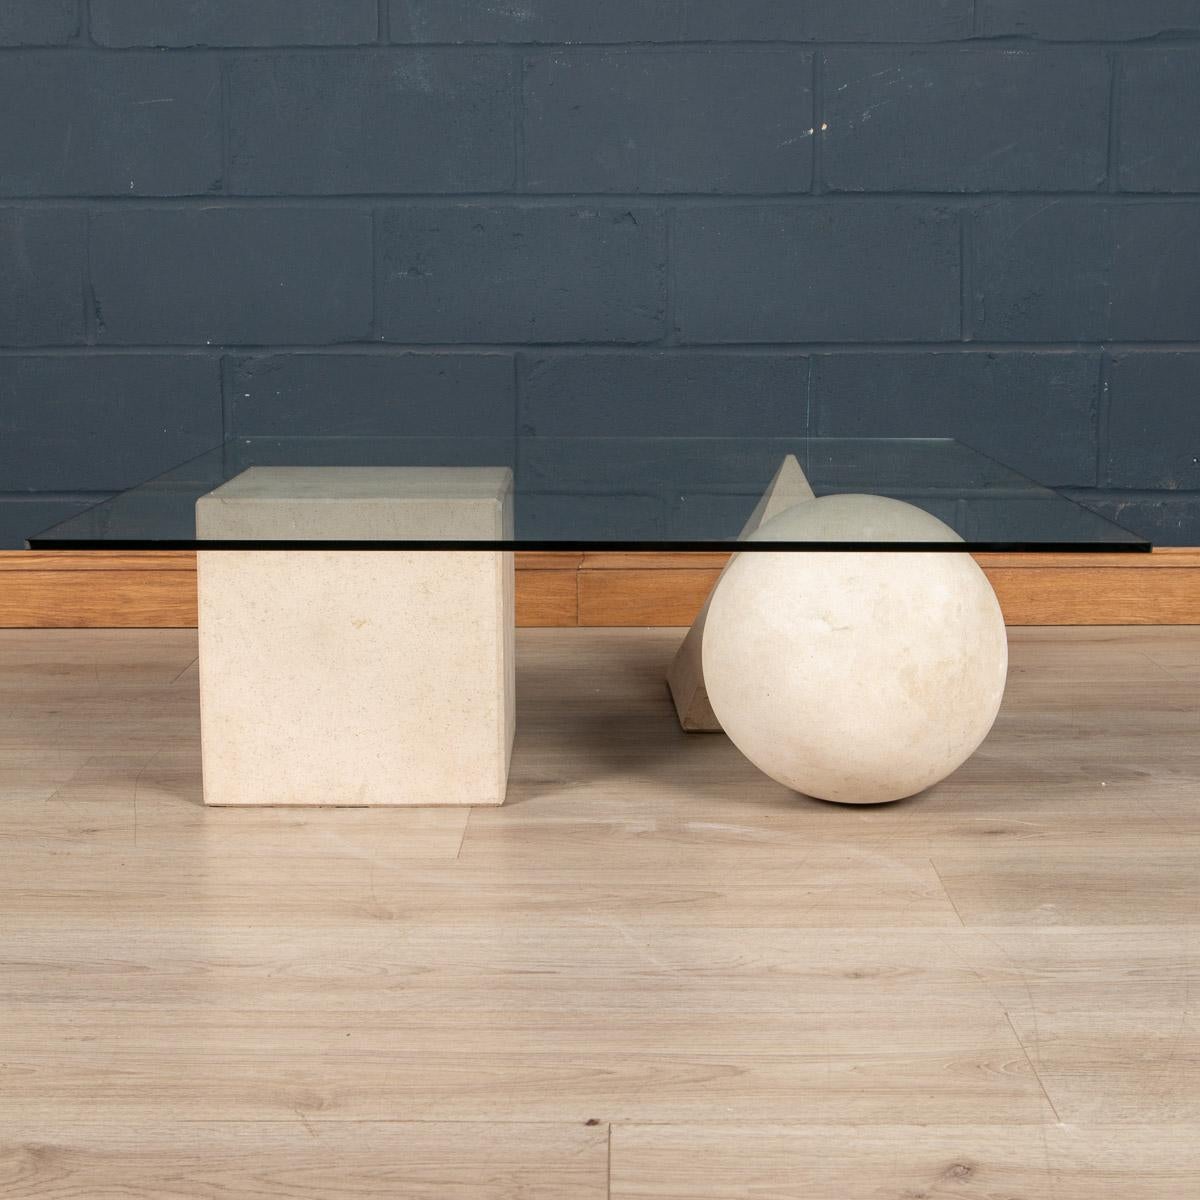 These wonderful coffee tables were one of their most iconic designs. Vignelli’s ethos was, 